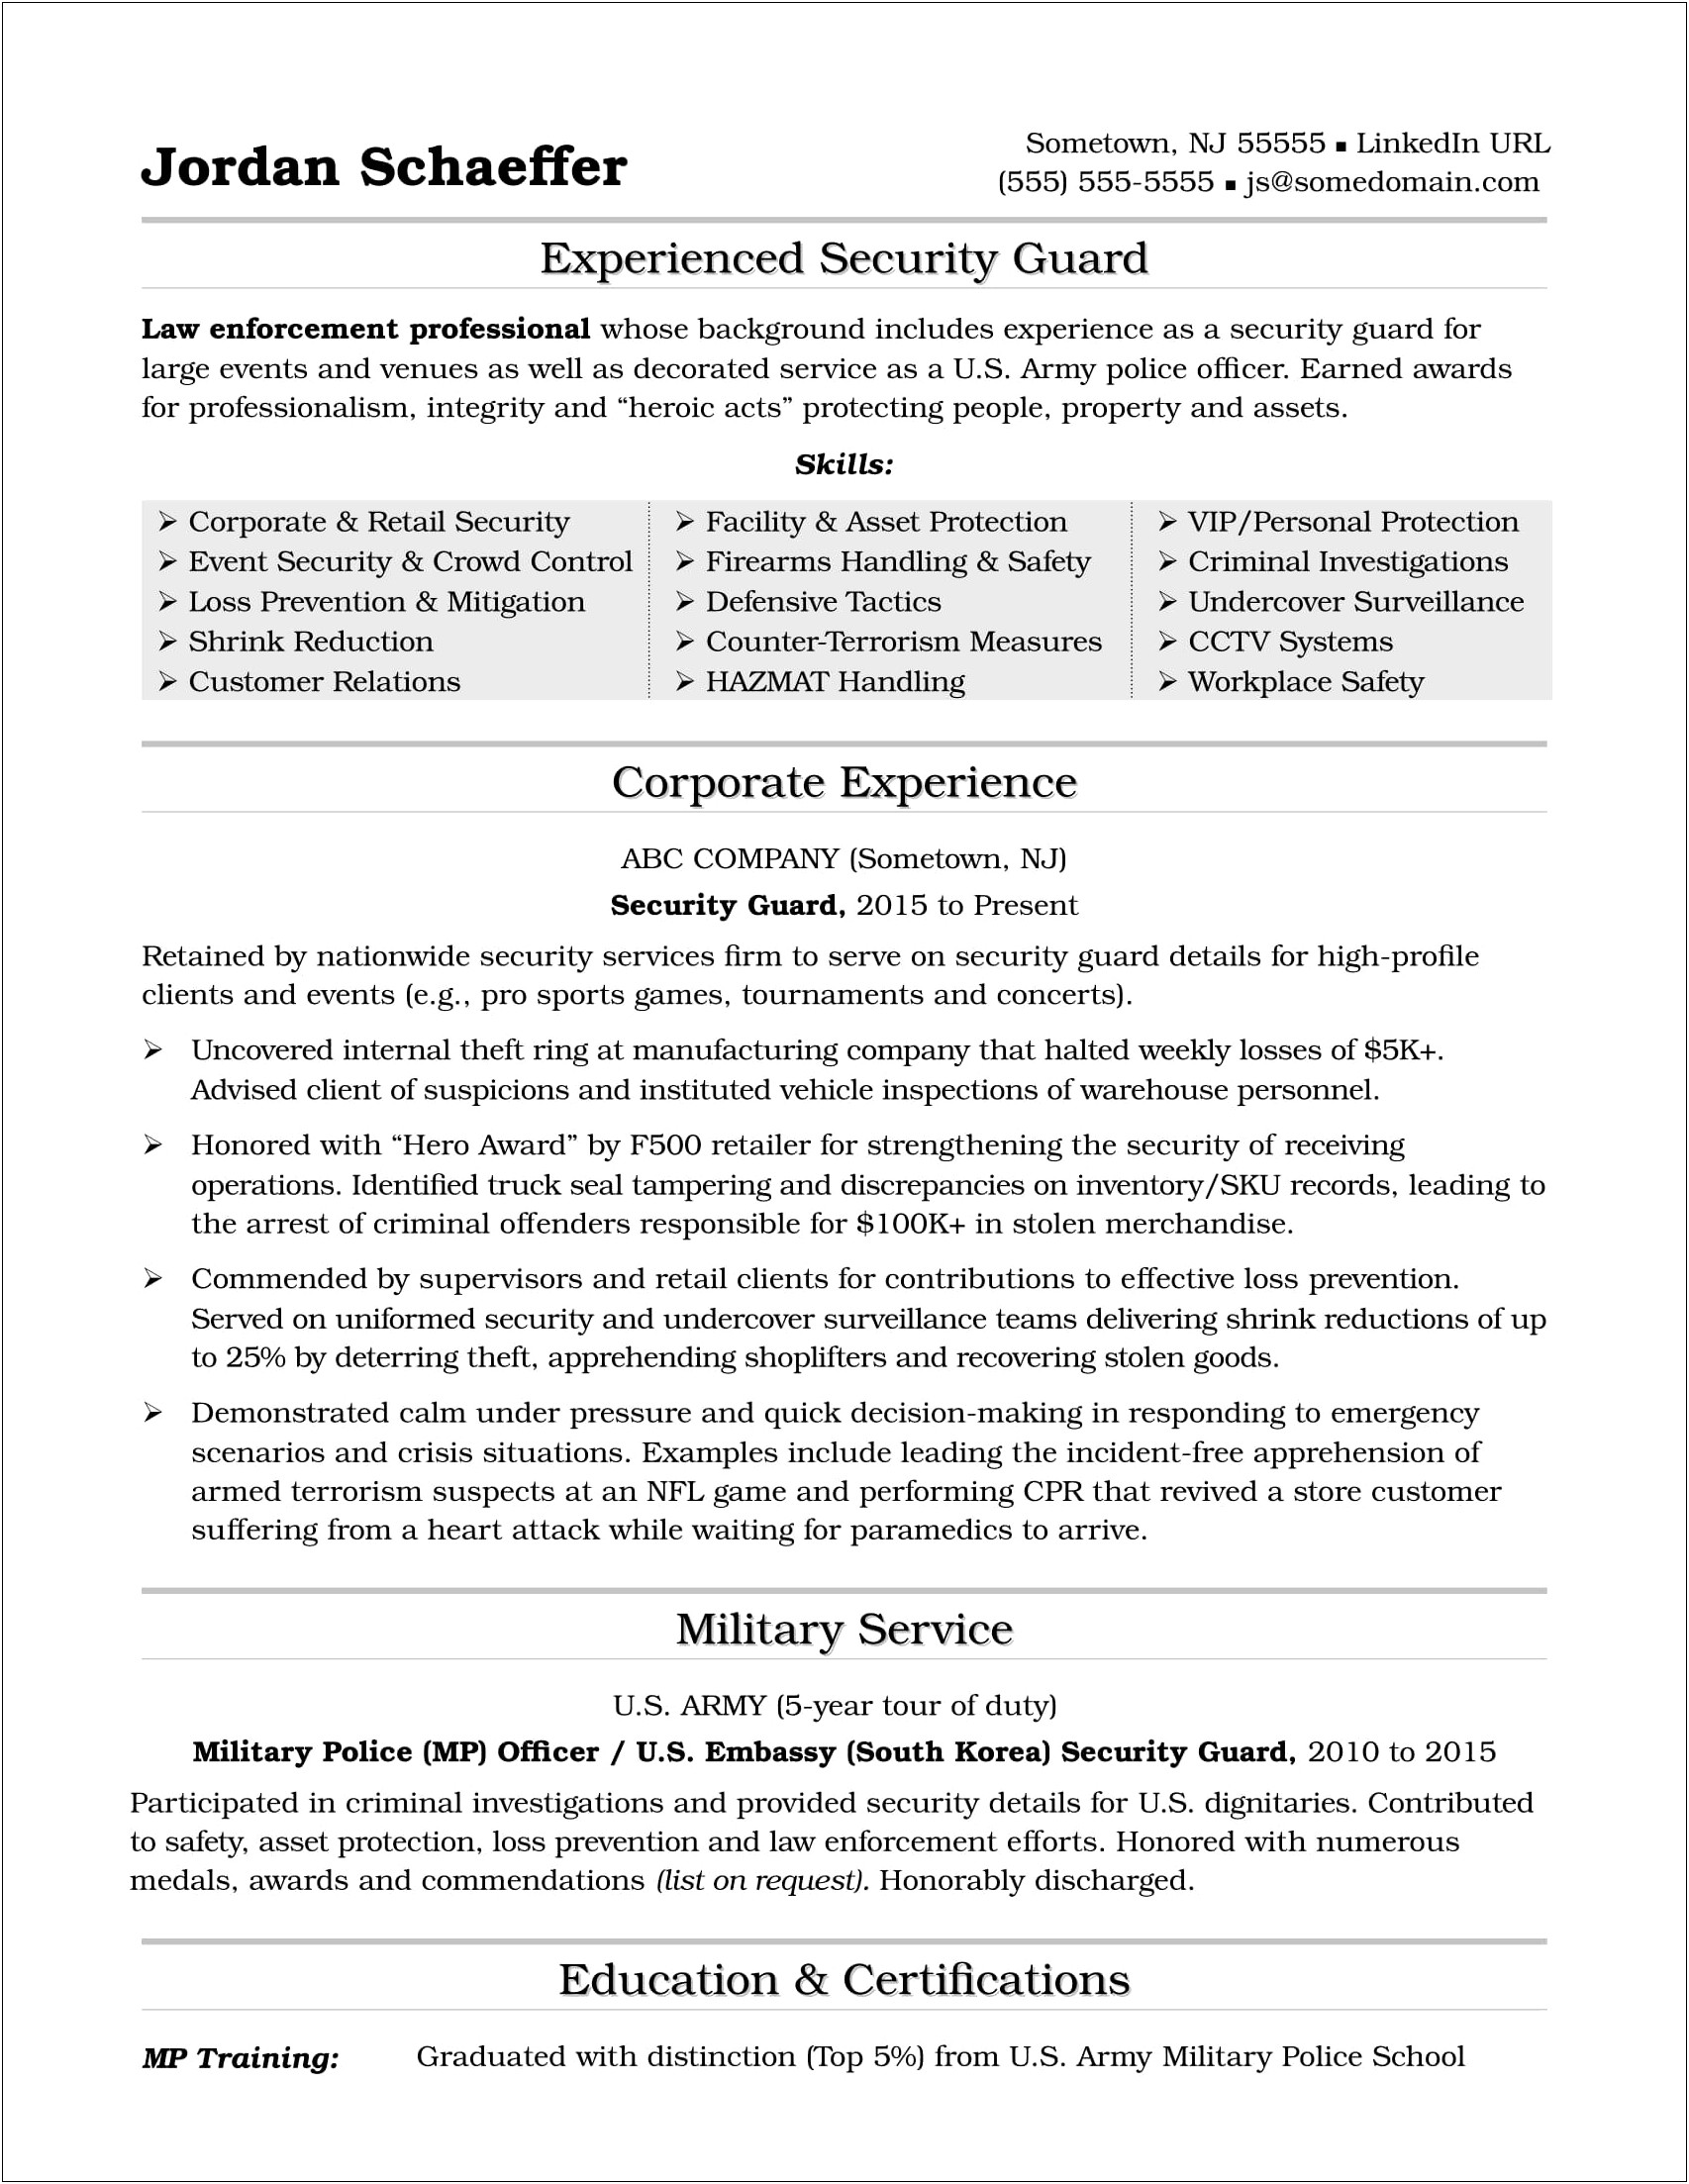 Resume Padding Examples In Sports